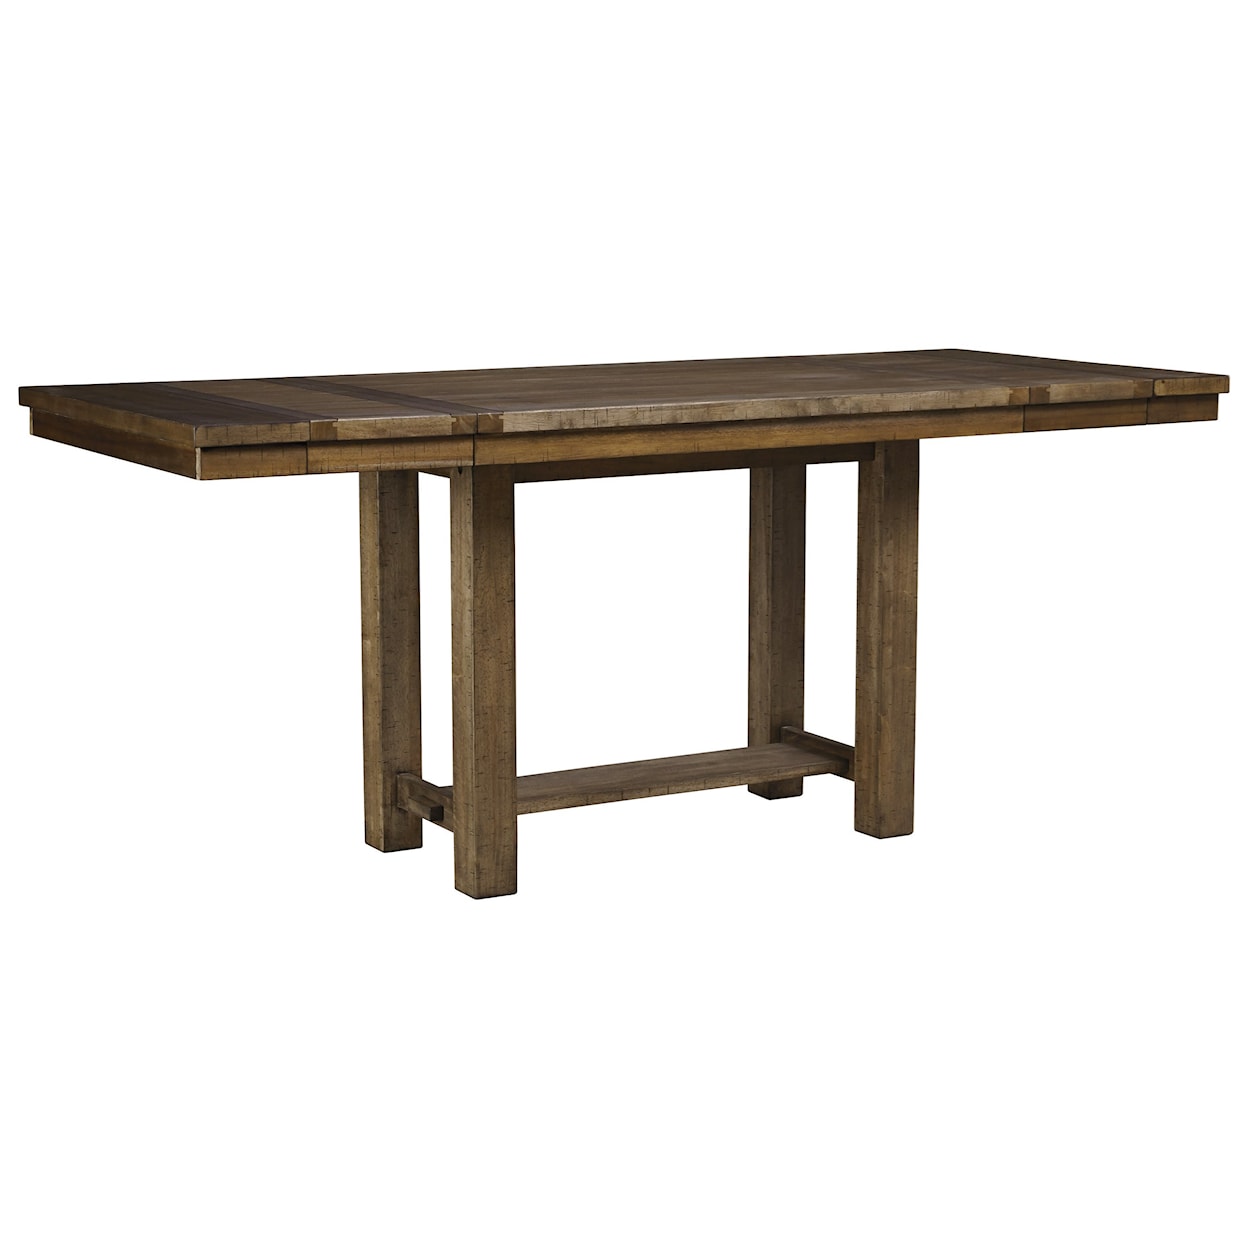 Signature Design Moriville Rect. Dining Room Counter Extension Table